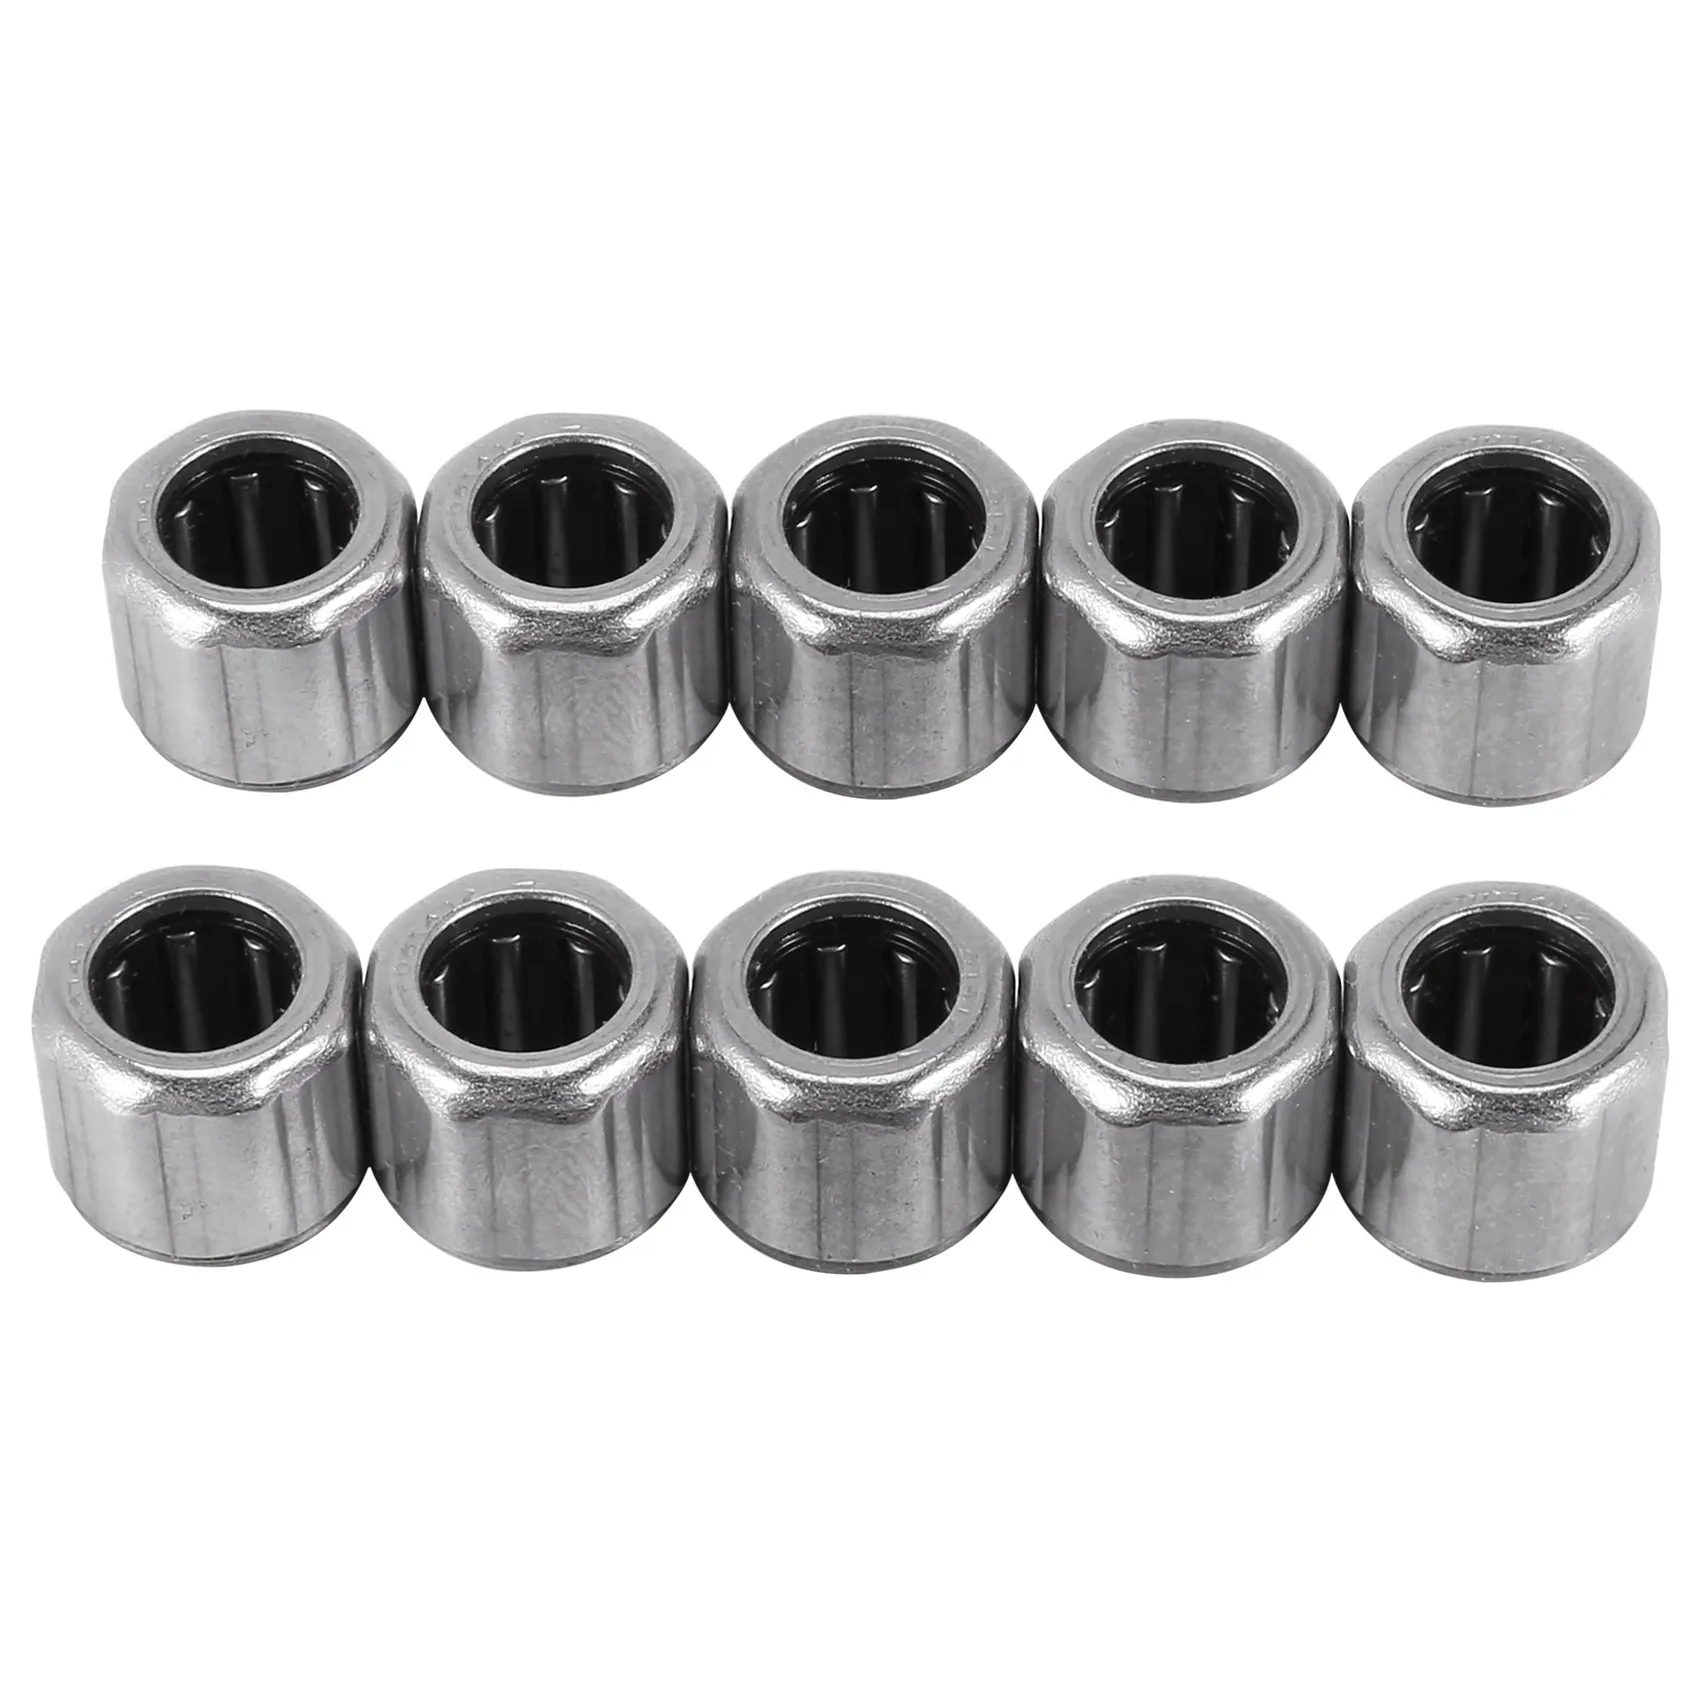 10Pcs Needle Bearing HF081412 Outer Ring Octagon One-Way Needle Roller Bearing 8X14X12mm for Manufacturing Industry